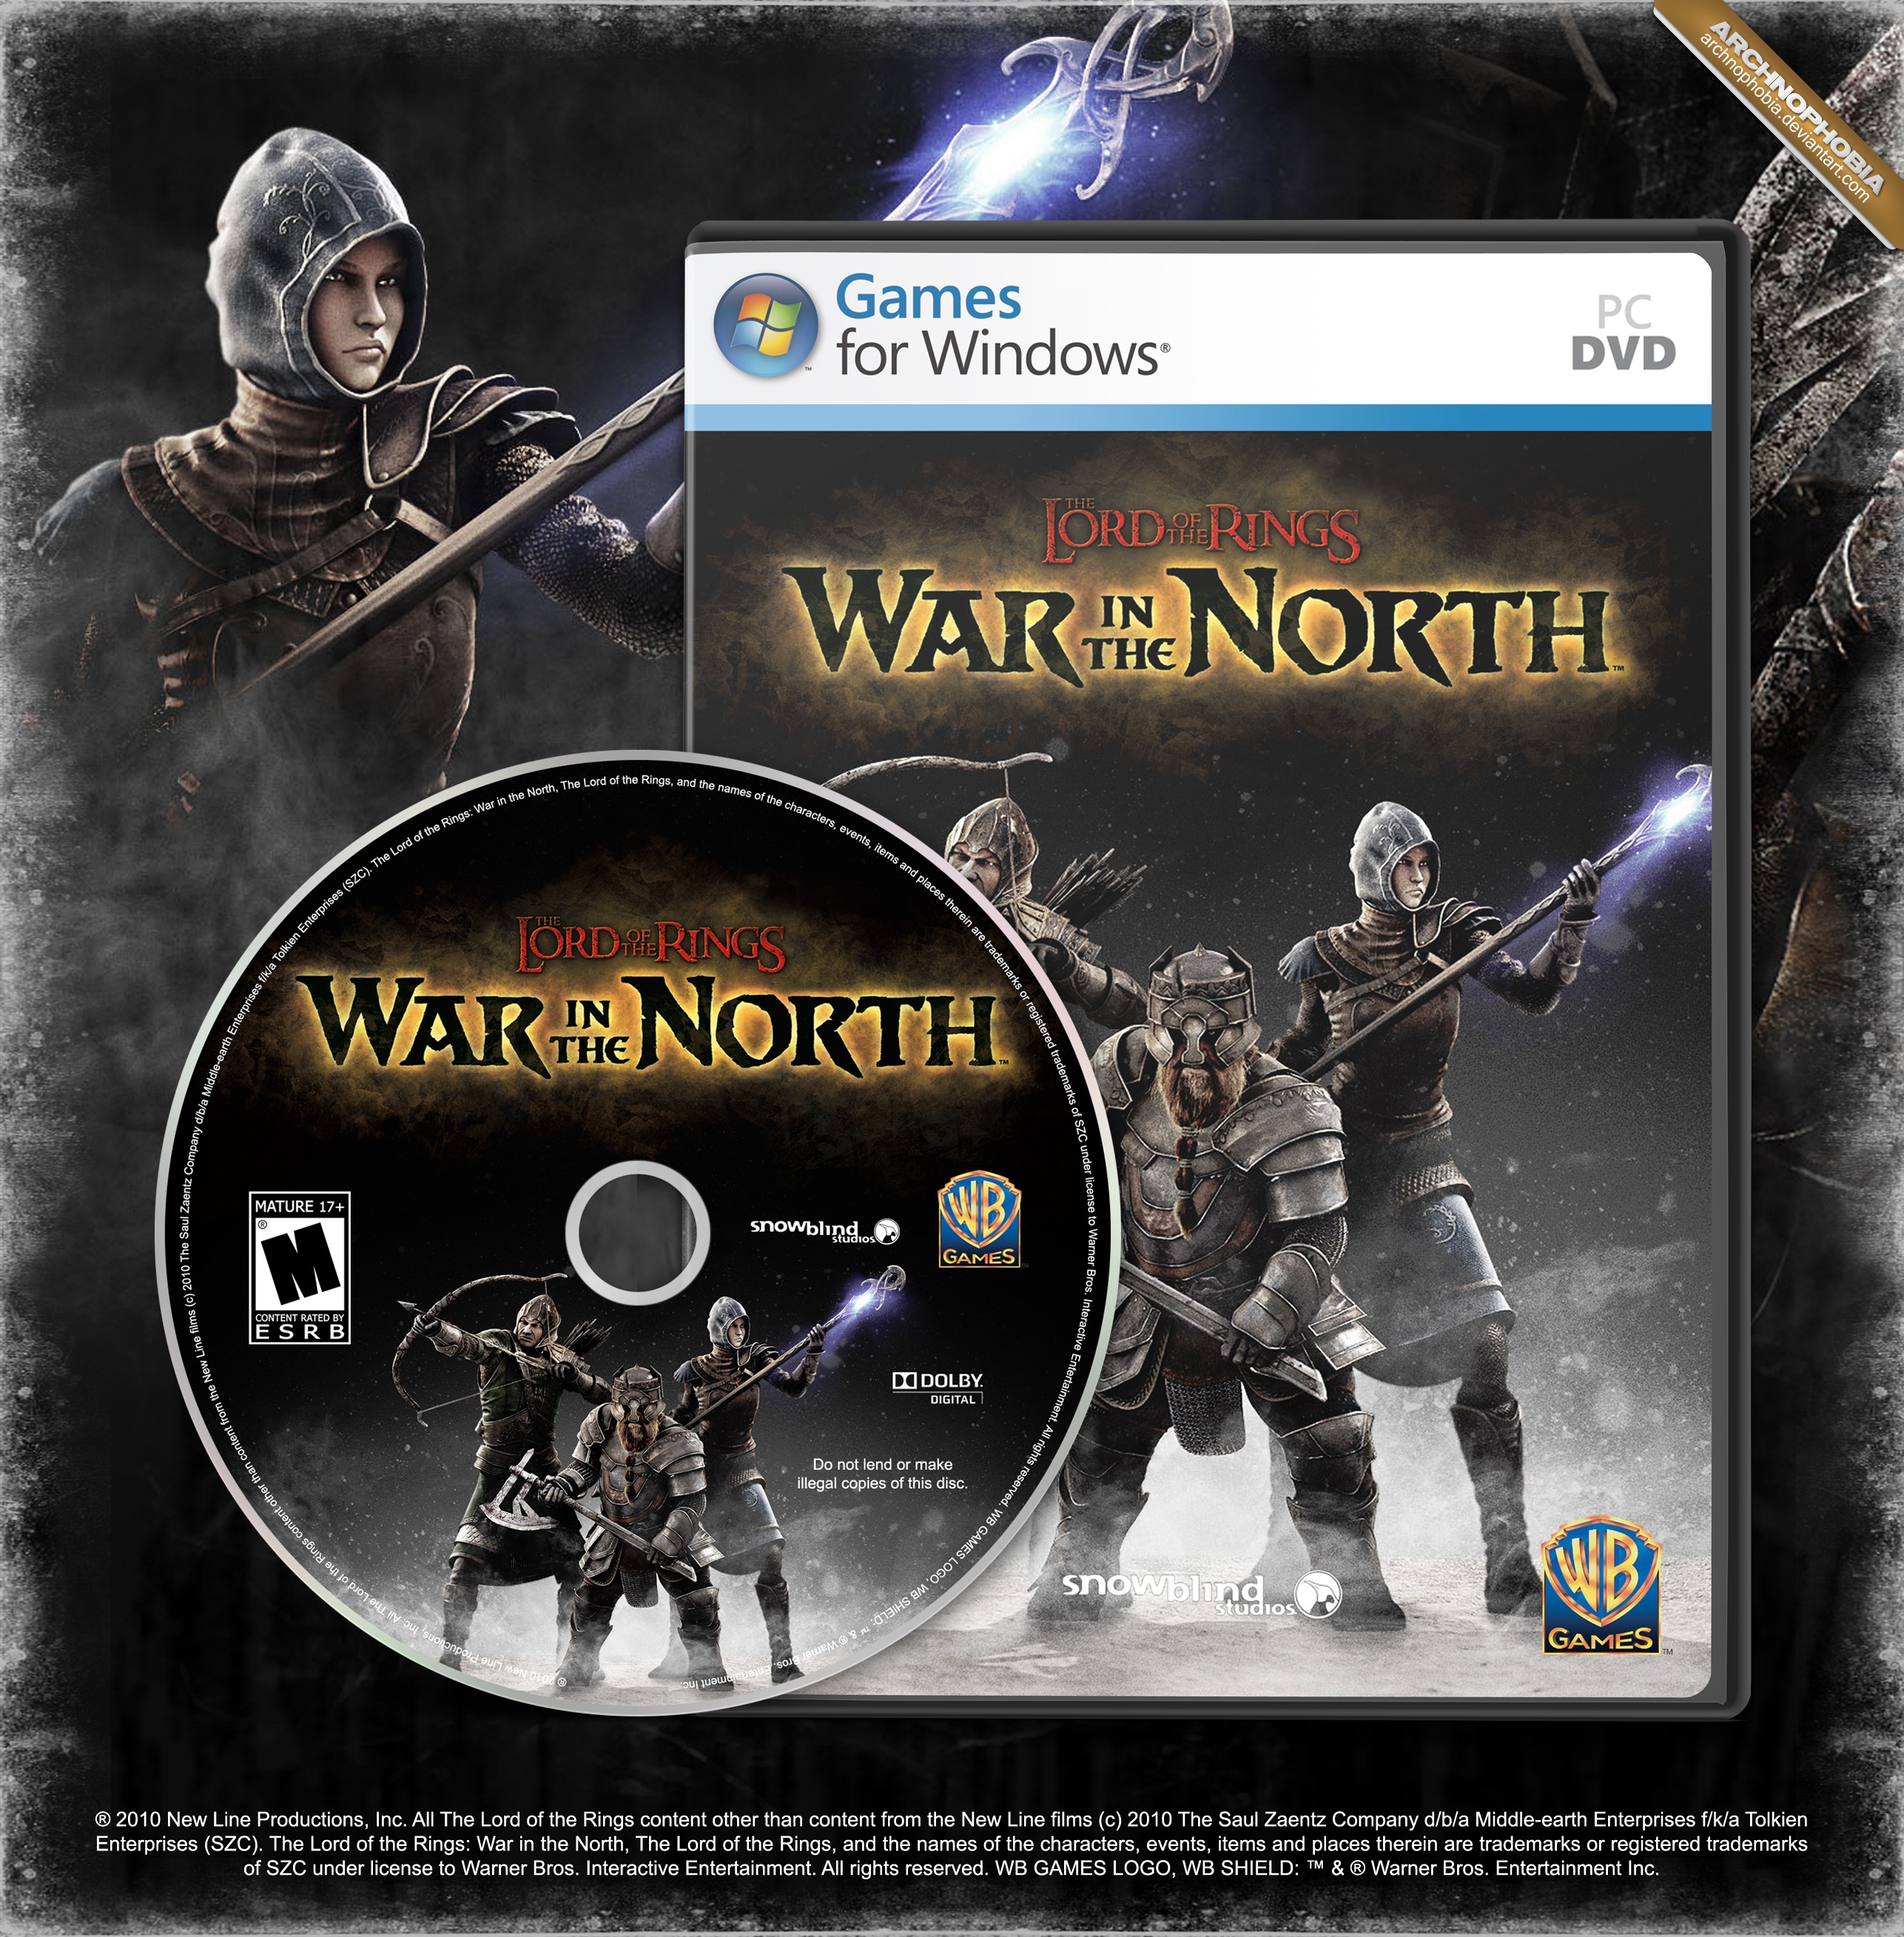 The Lord Of The Rings: War In The North box cover